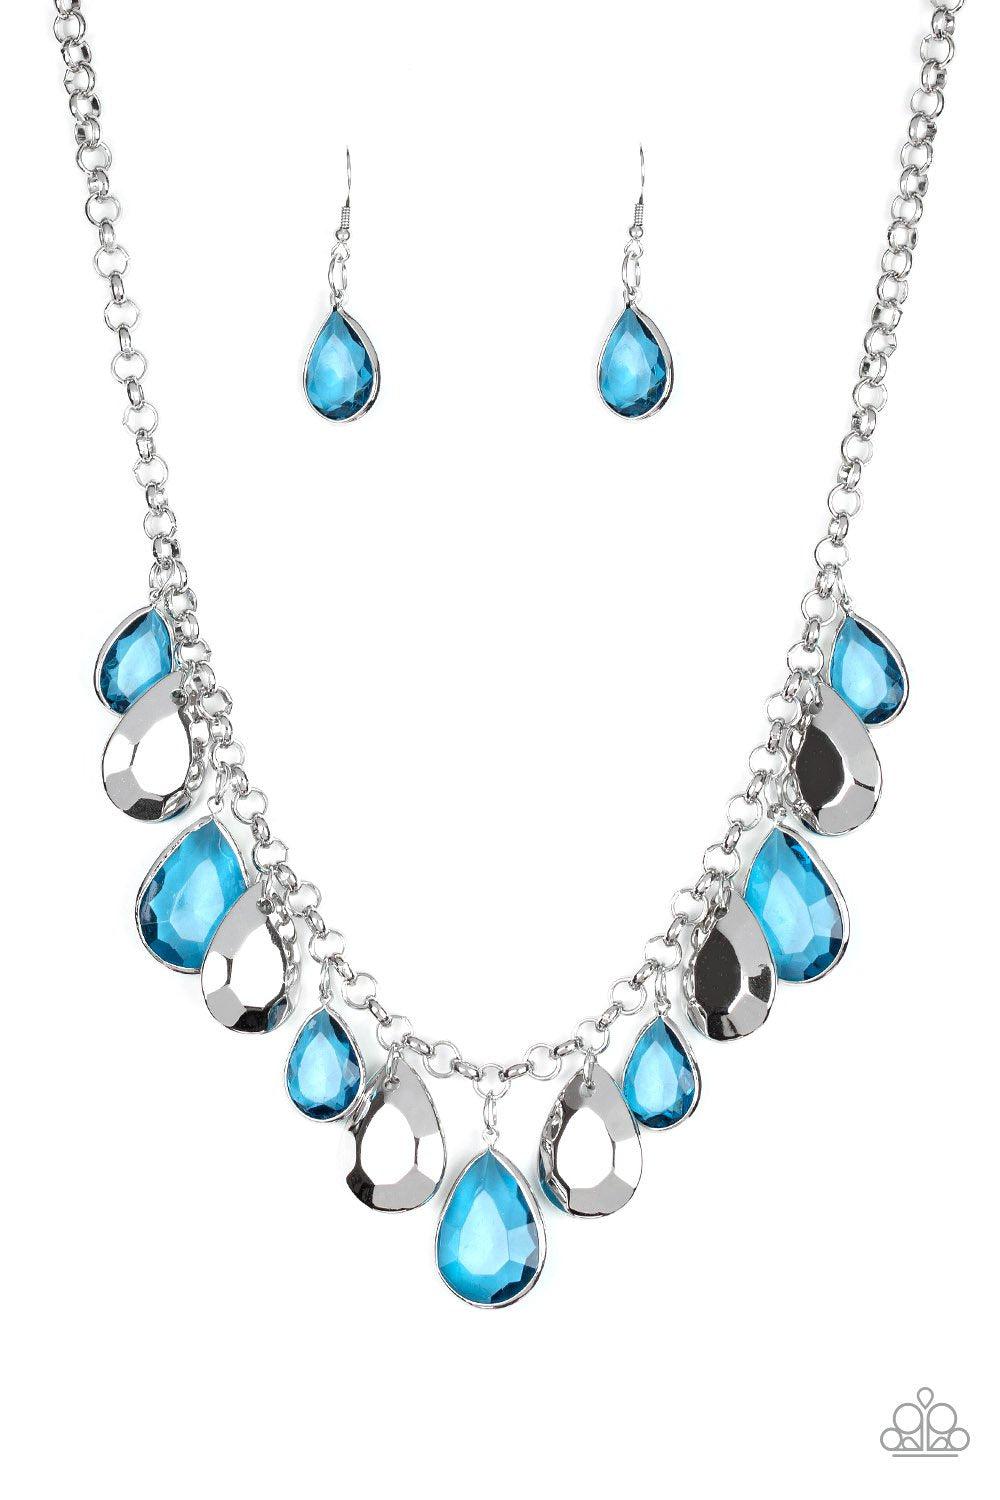 CLIQUE-bait Blue and Silver Necklace - Paparazzi Accessories - lightbox -CarasShop.com - $5 Jewelry by Cara Jewels